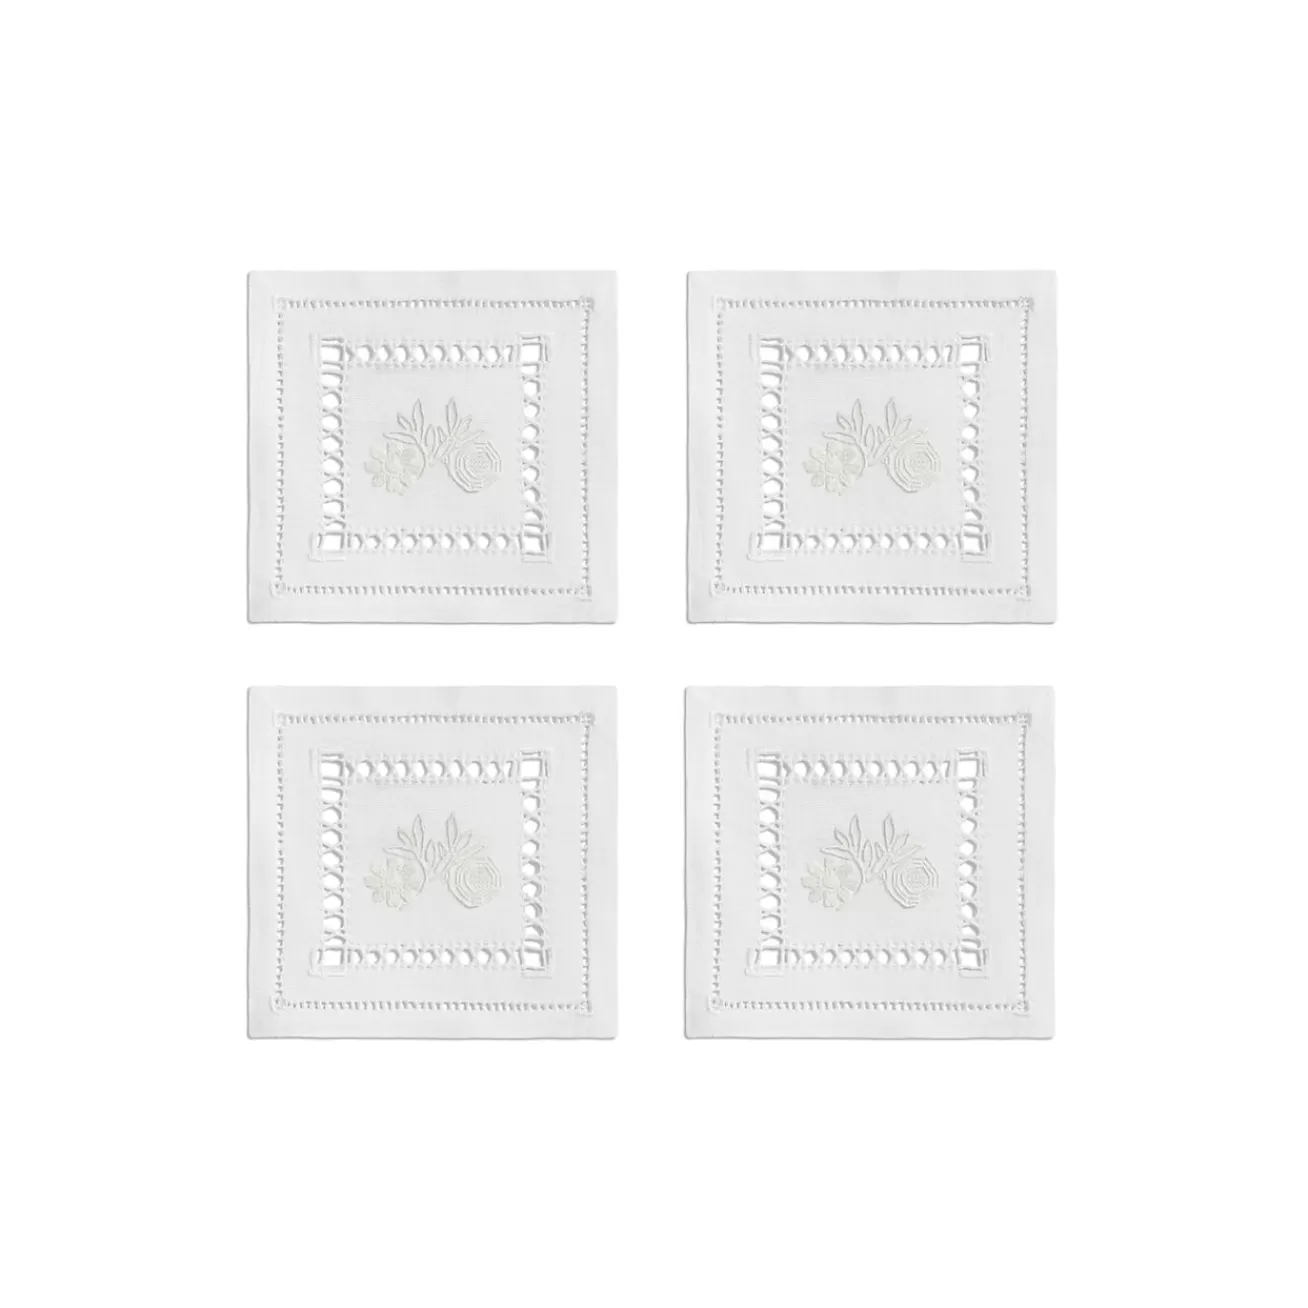 Tiffany & Co. Tiffany Heritage Coasters Set of Four, in White Linen | ^ Table Linens